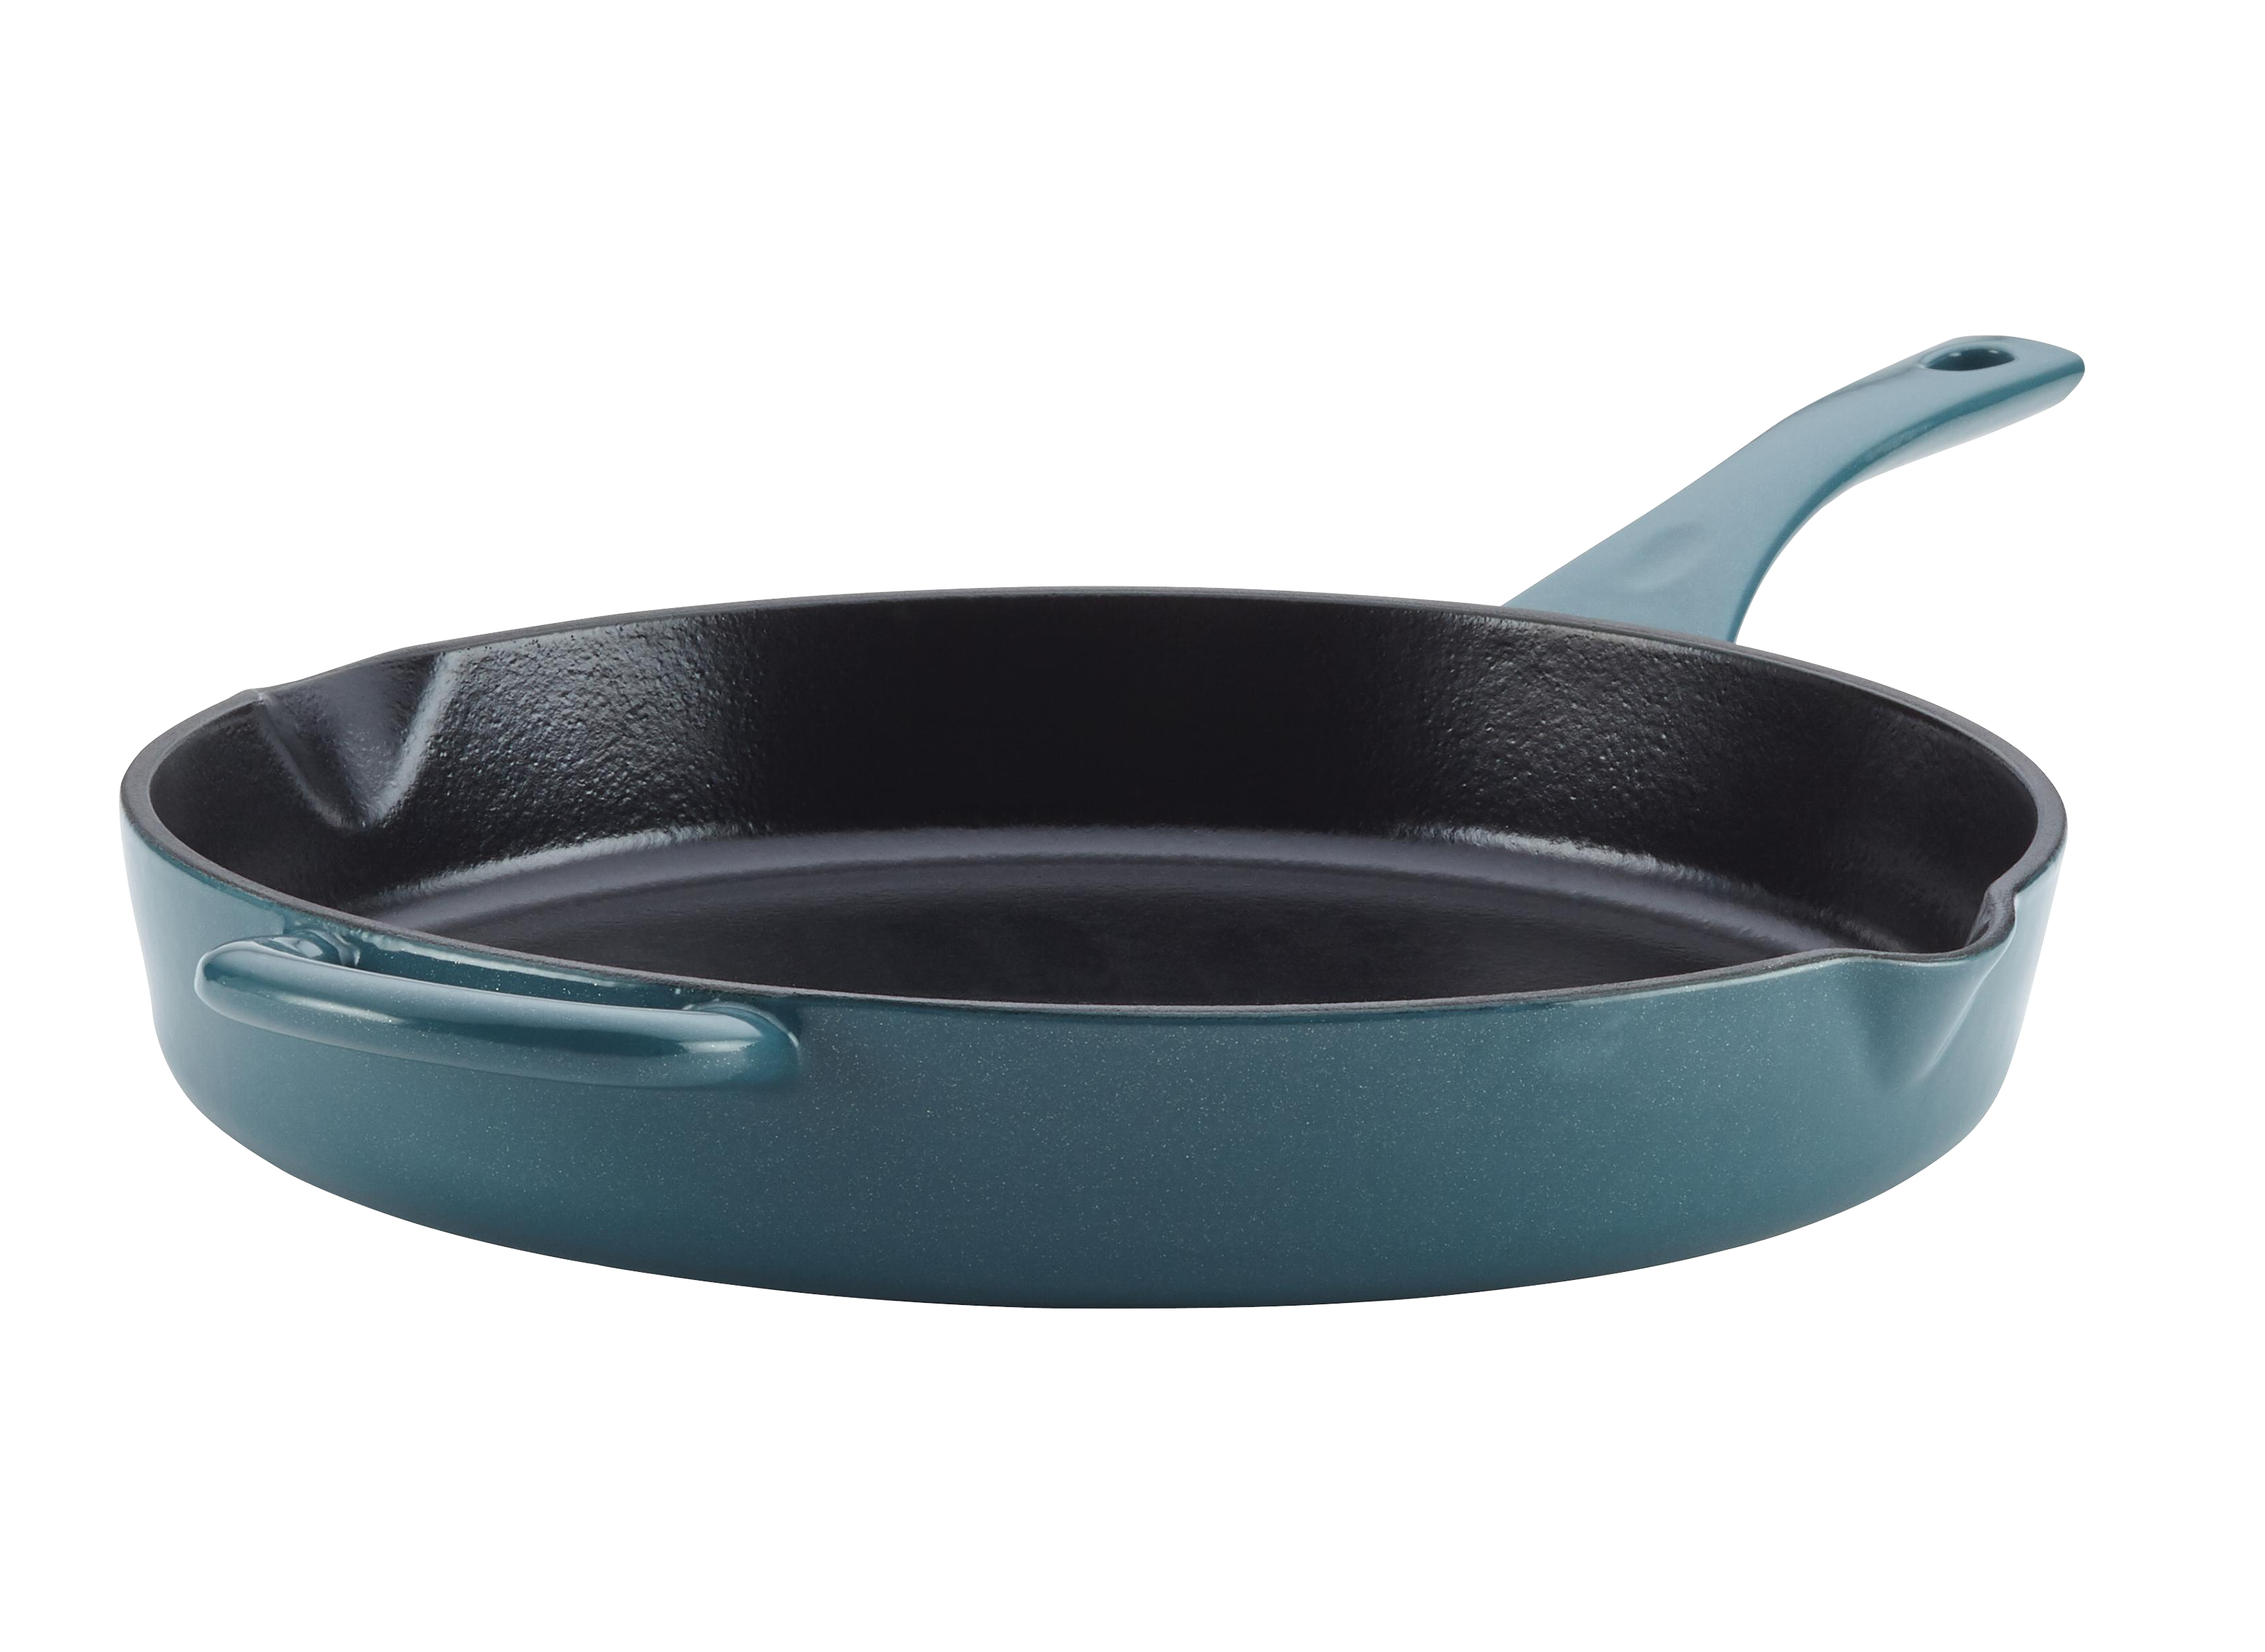 https://crdms.images.consumerreports.org/prod/products/cr/models/400497-coated-cast-iron-ayesha-curry-enamel-coated-10010373.png